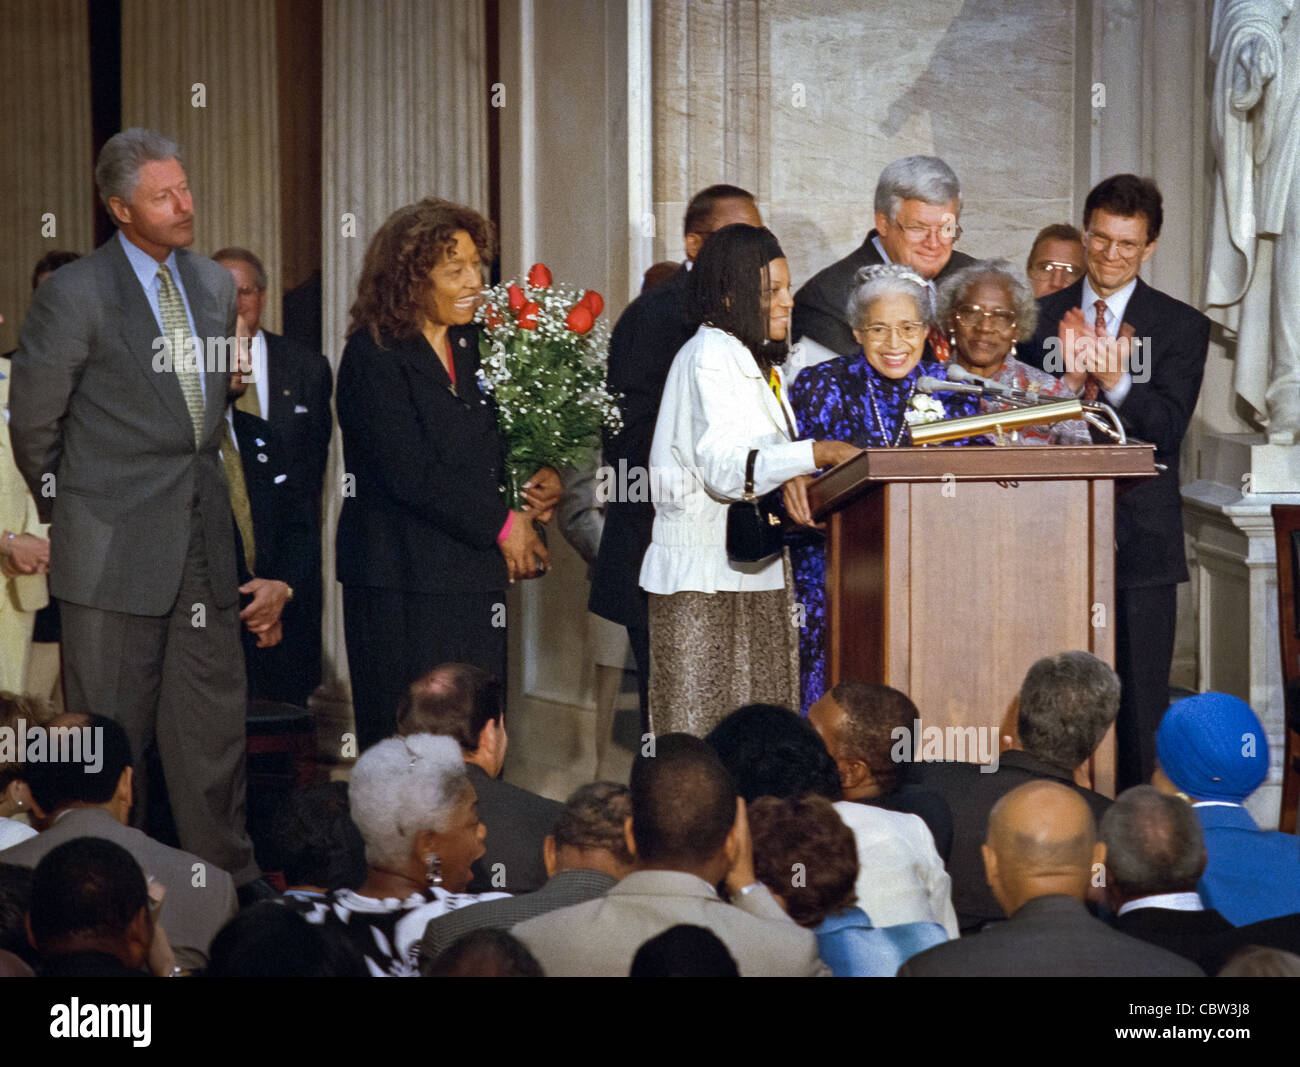 Civil rights heroine Rosa Parks stands at the podium surrounded by President Bill Clinton, US House Speaker Dennis Hastert and her attendant Elaine Steele after being awarded the Congressional Gold Medal June 15, 1999 in Washington, DC. Parks was awarded the Congressional Gold Medal Stock Photo